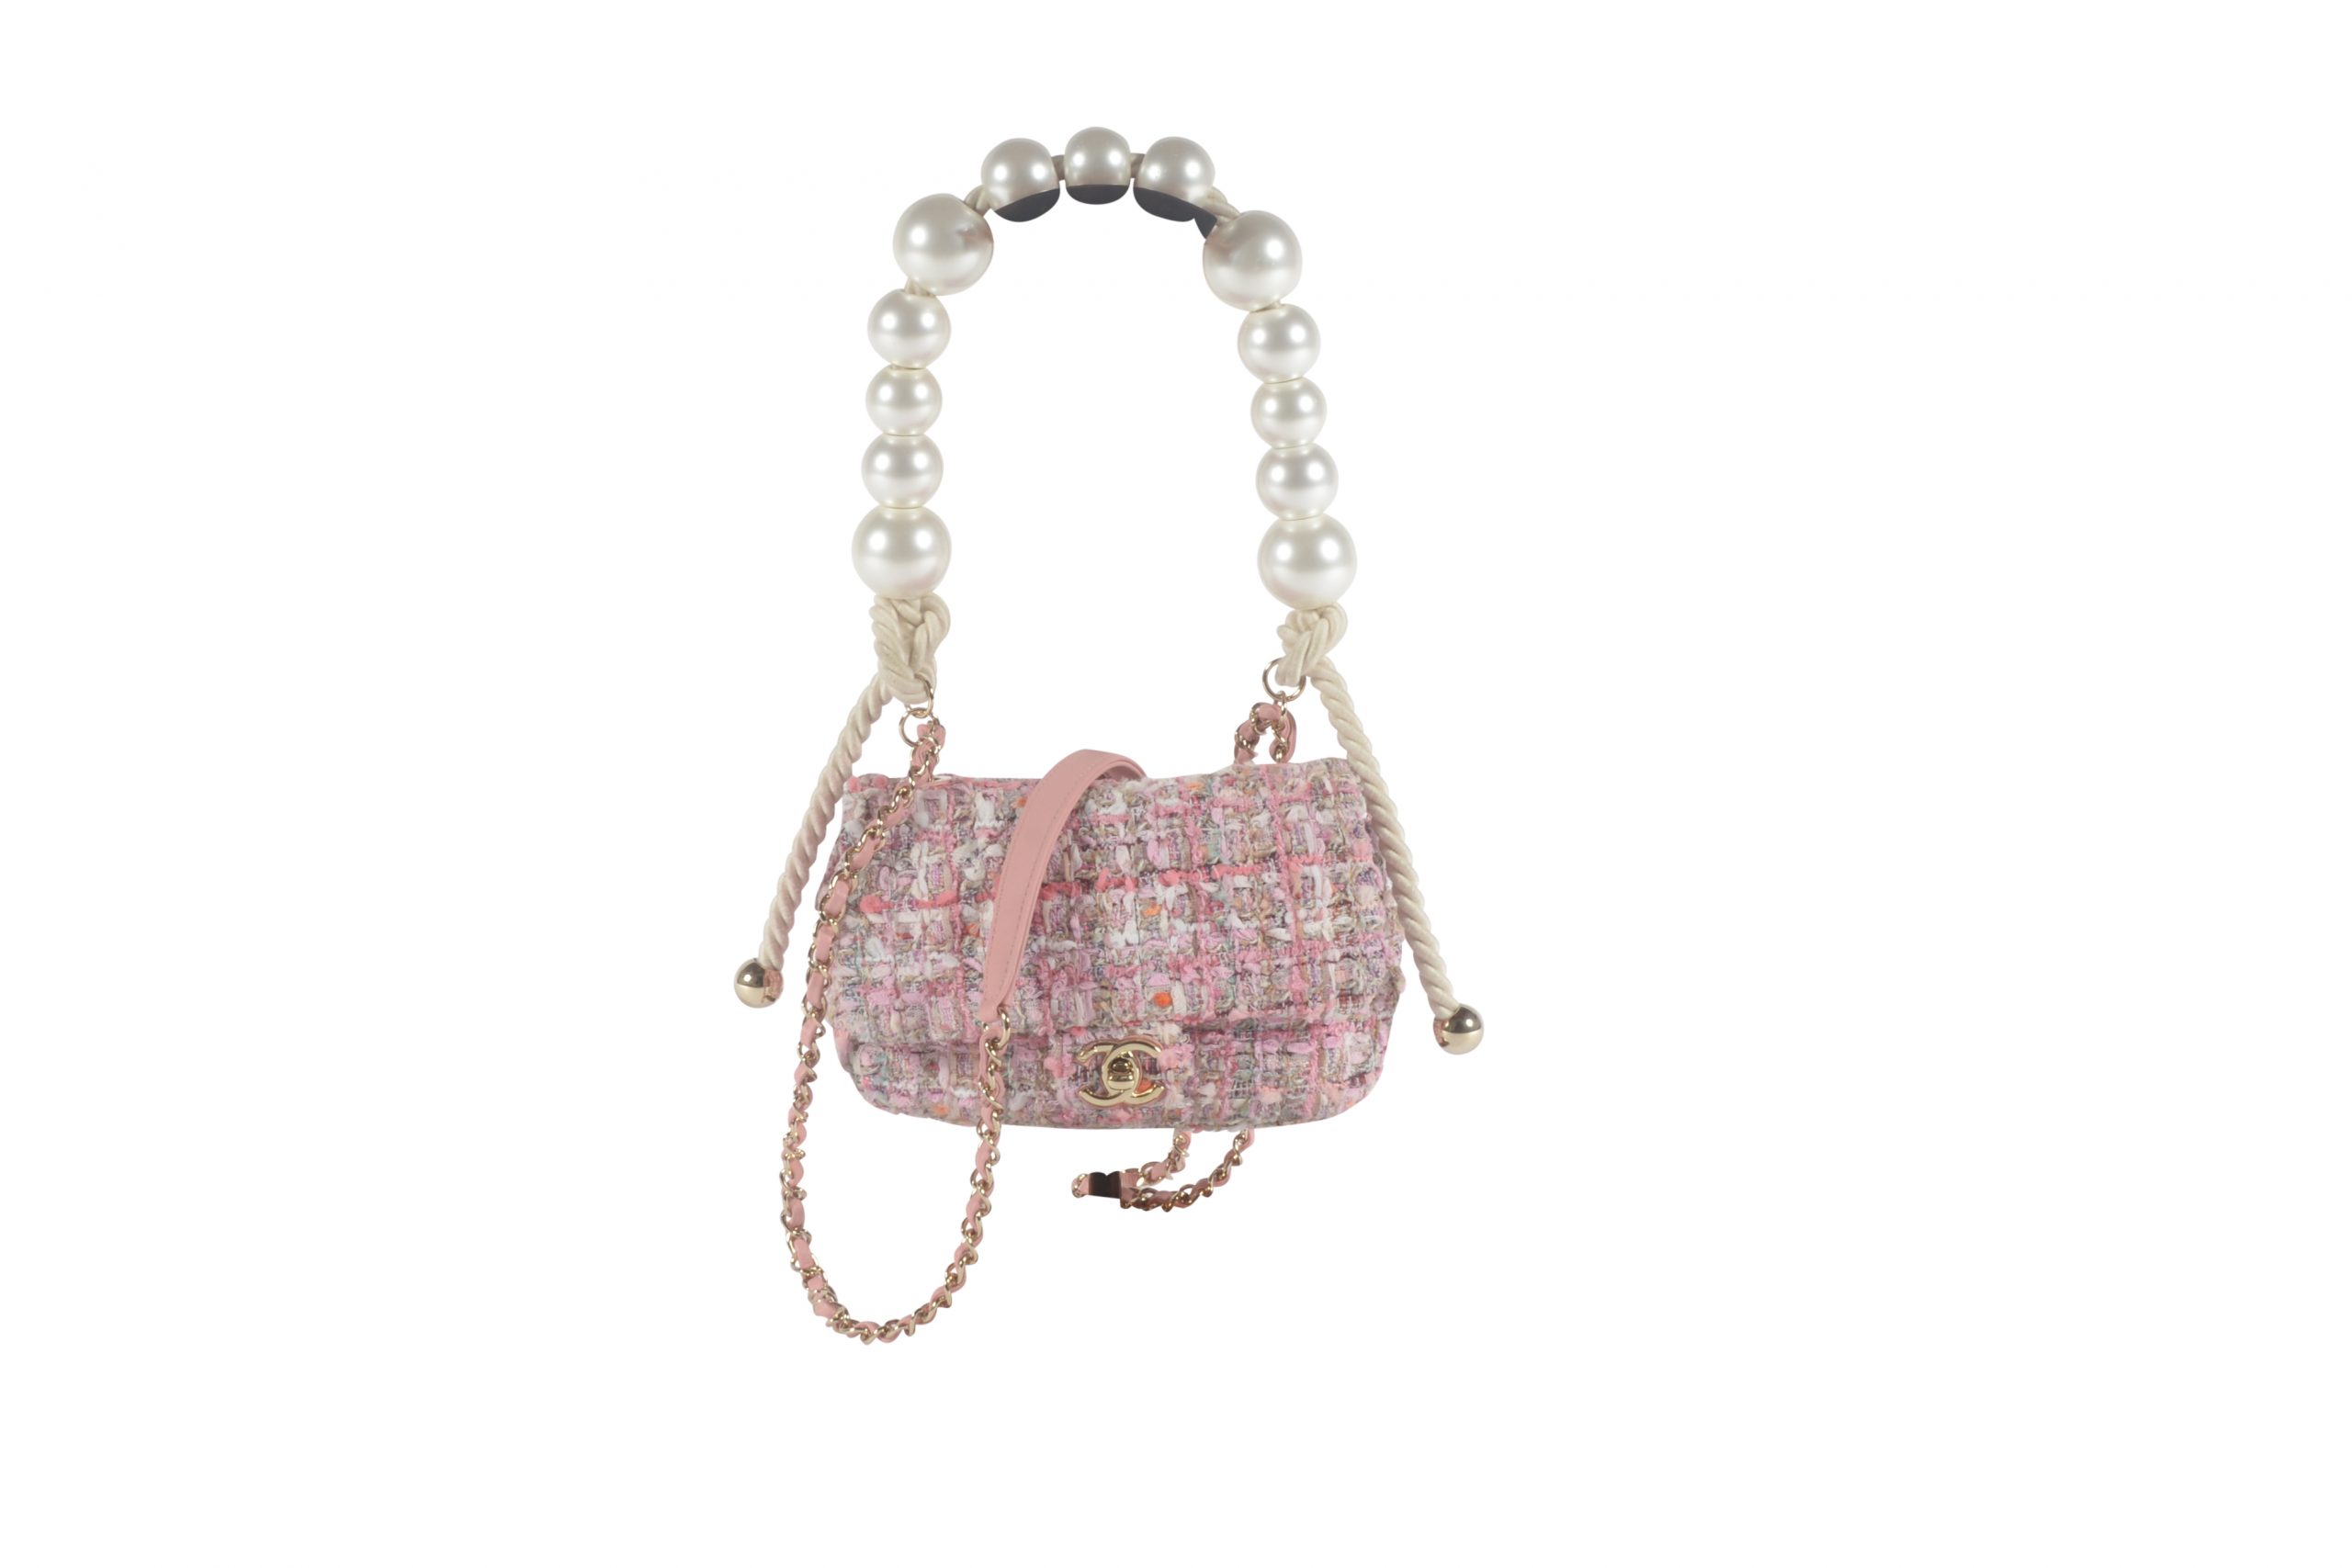 Chanel Tweed Flap Bag with Pearl Detail - Janet Mandell